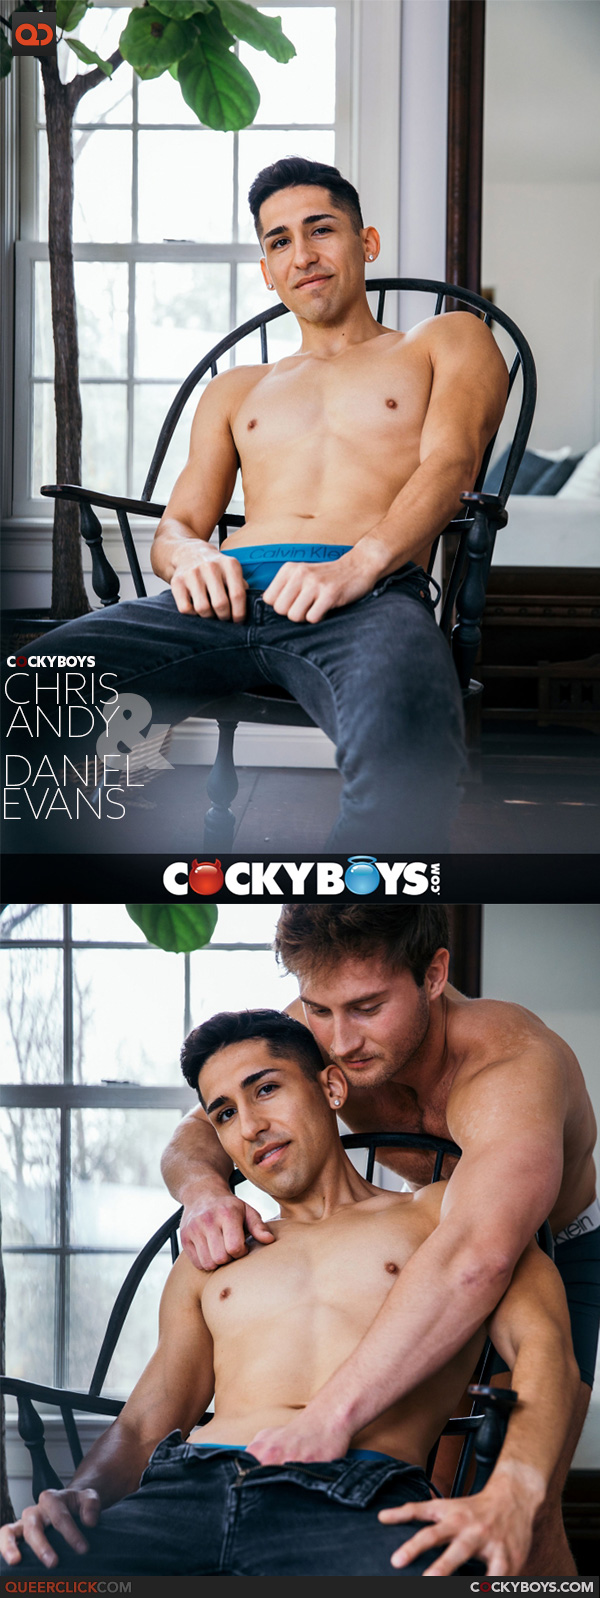 CockyBoys: Chris Andy and Daniel Evans